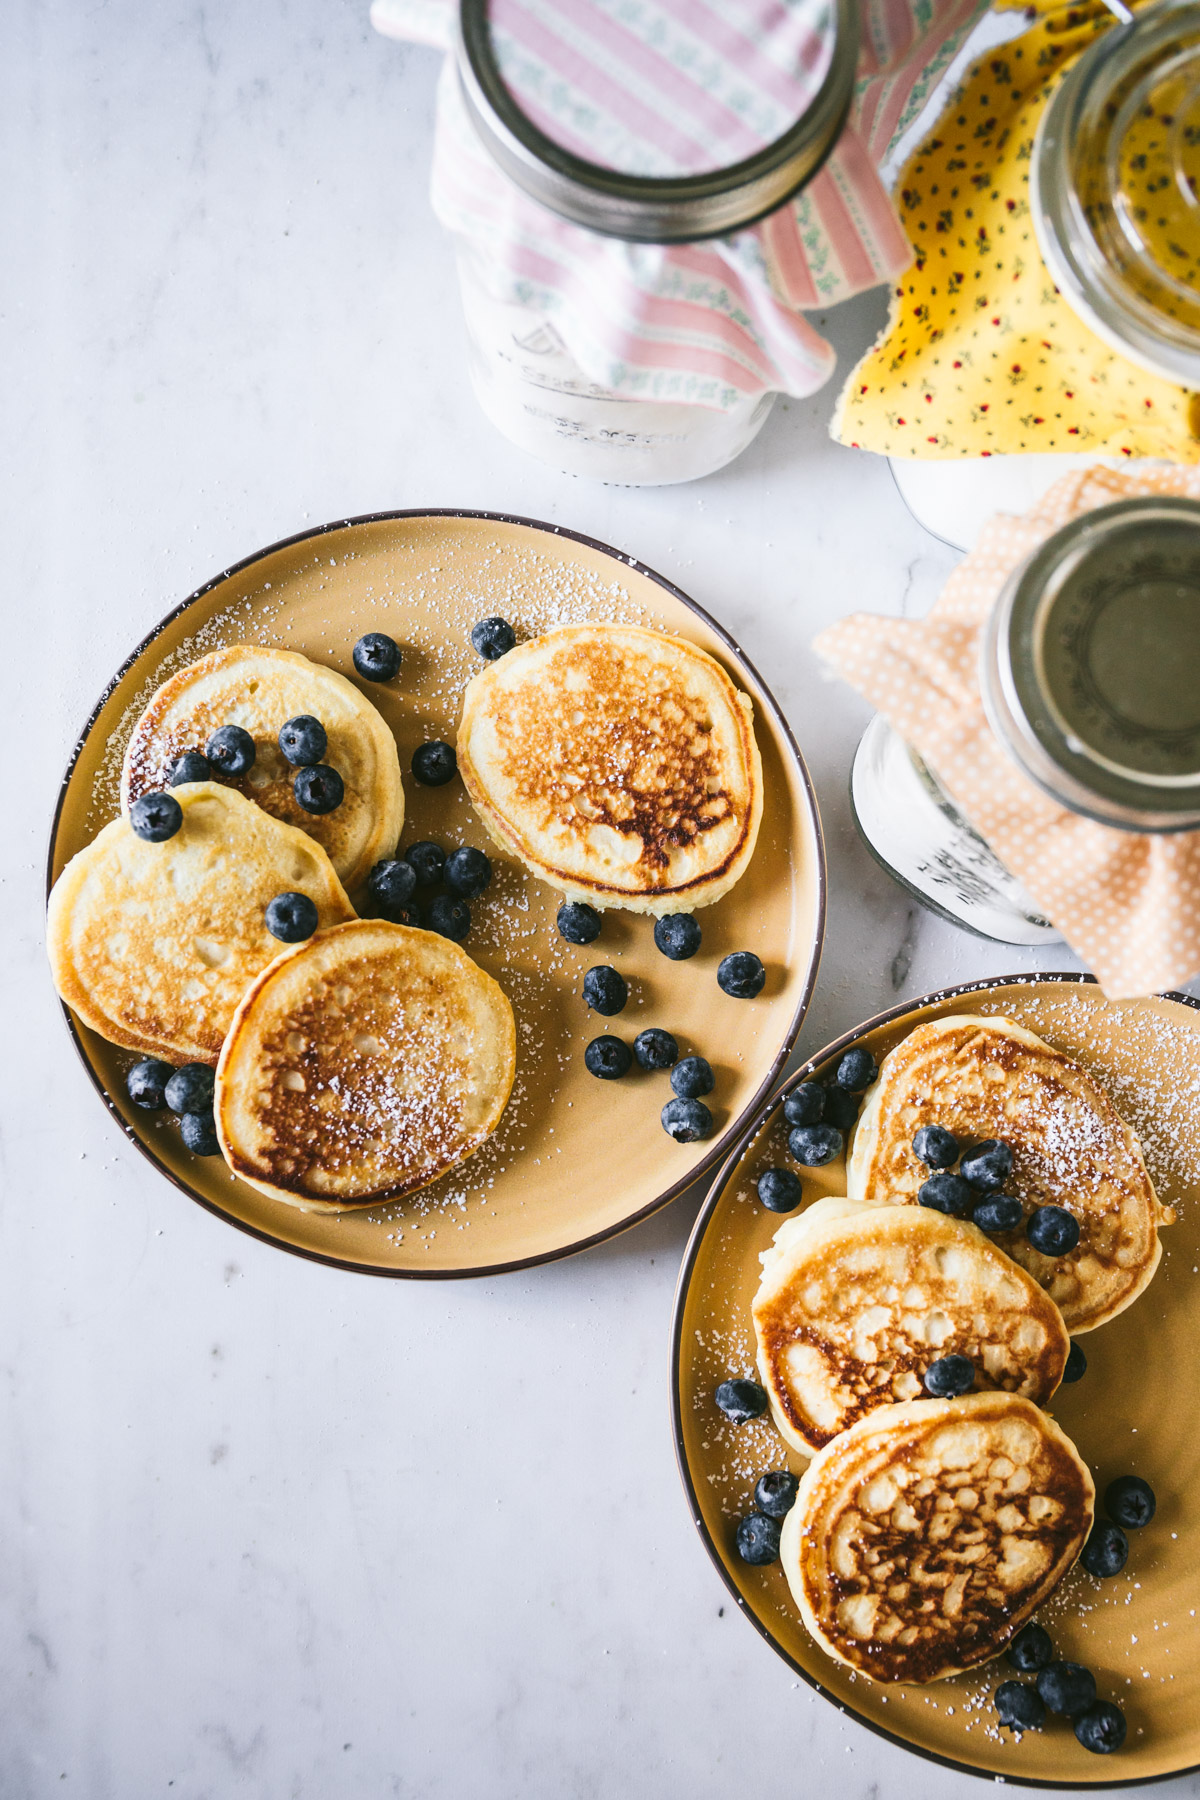 Overhead image of two mustard colored plates with small pancakes on top sprinkled with blueberries. The buttermilk pancake mix is on the upper right hand side.